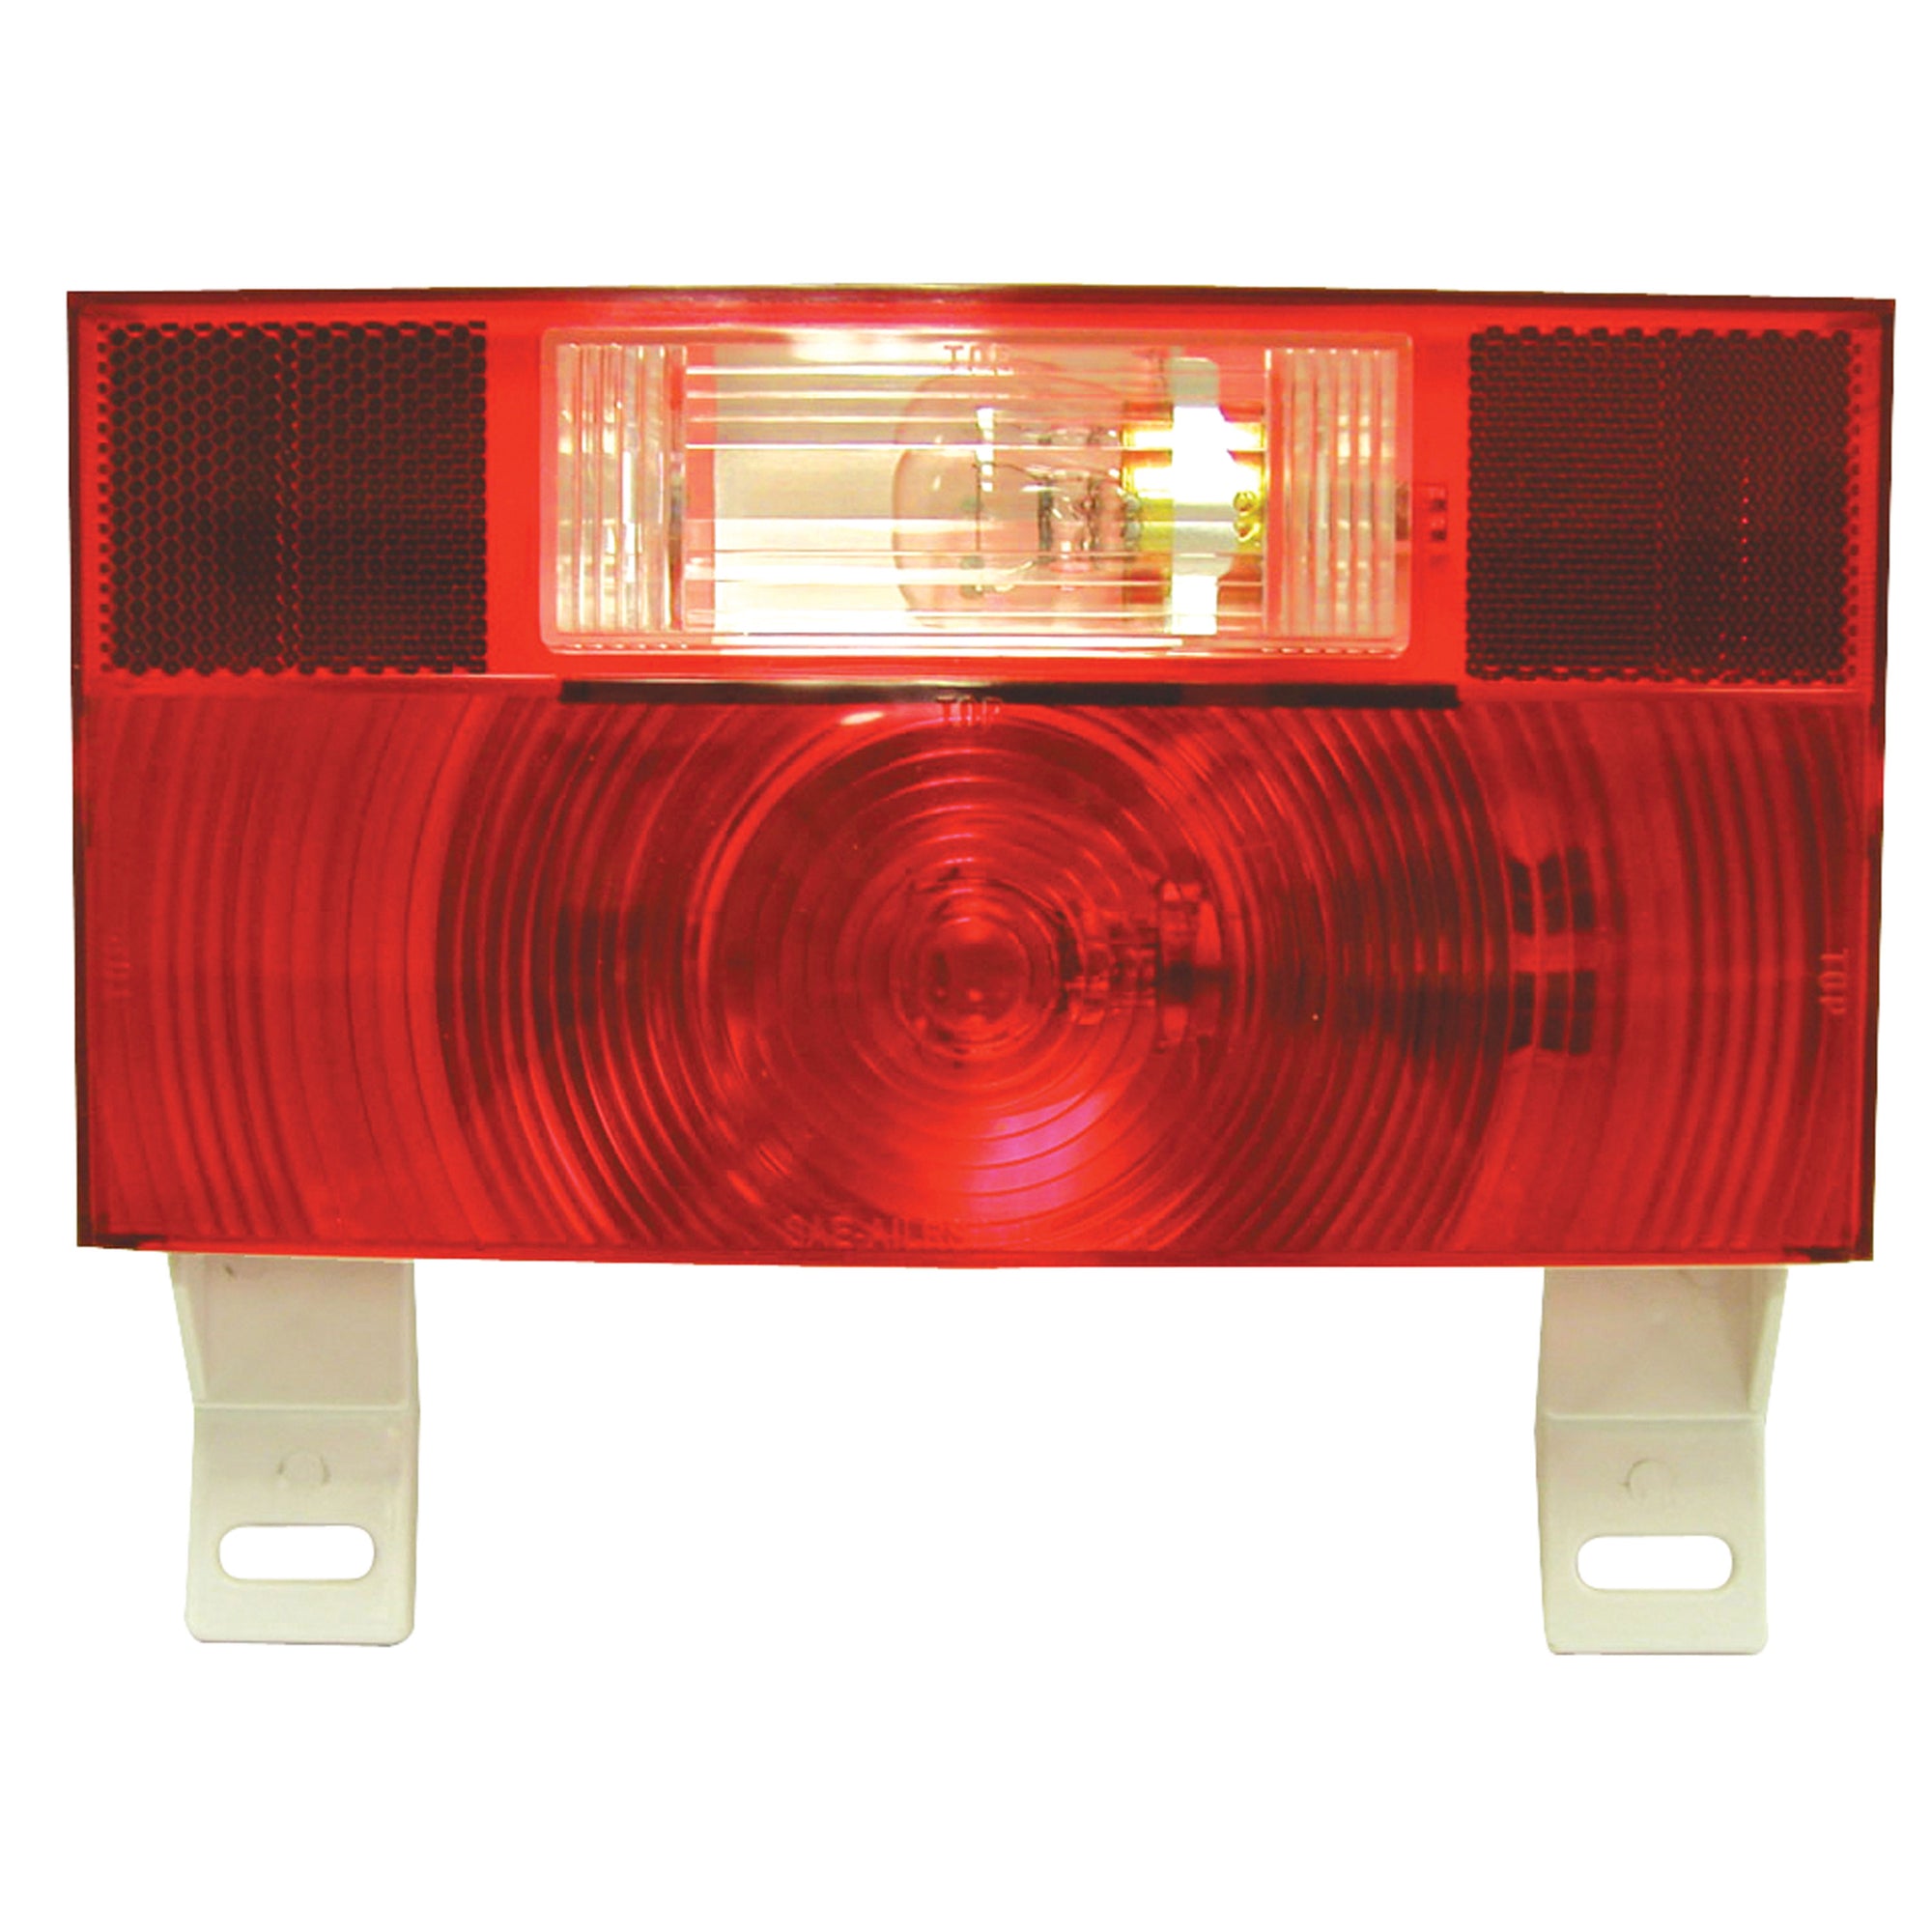 Peterson Manufacturing V25914 Stop, Turn, & Tail Light And License Light With Reflex - With Integral Back Up Light